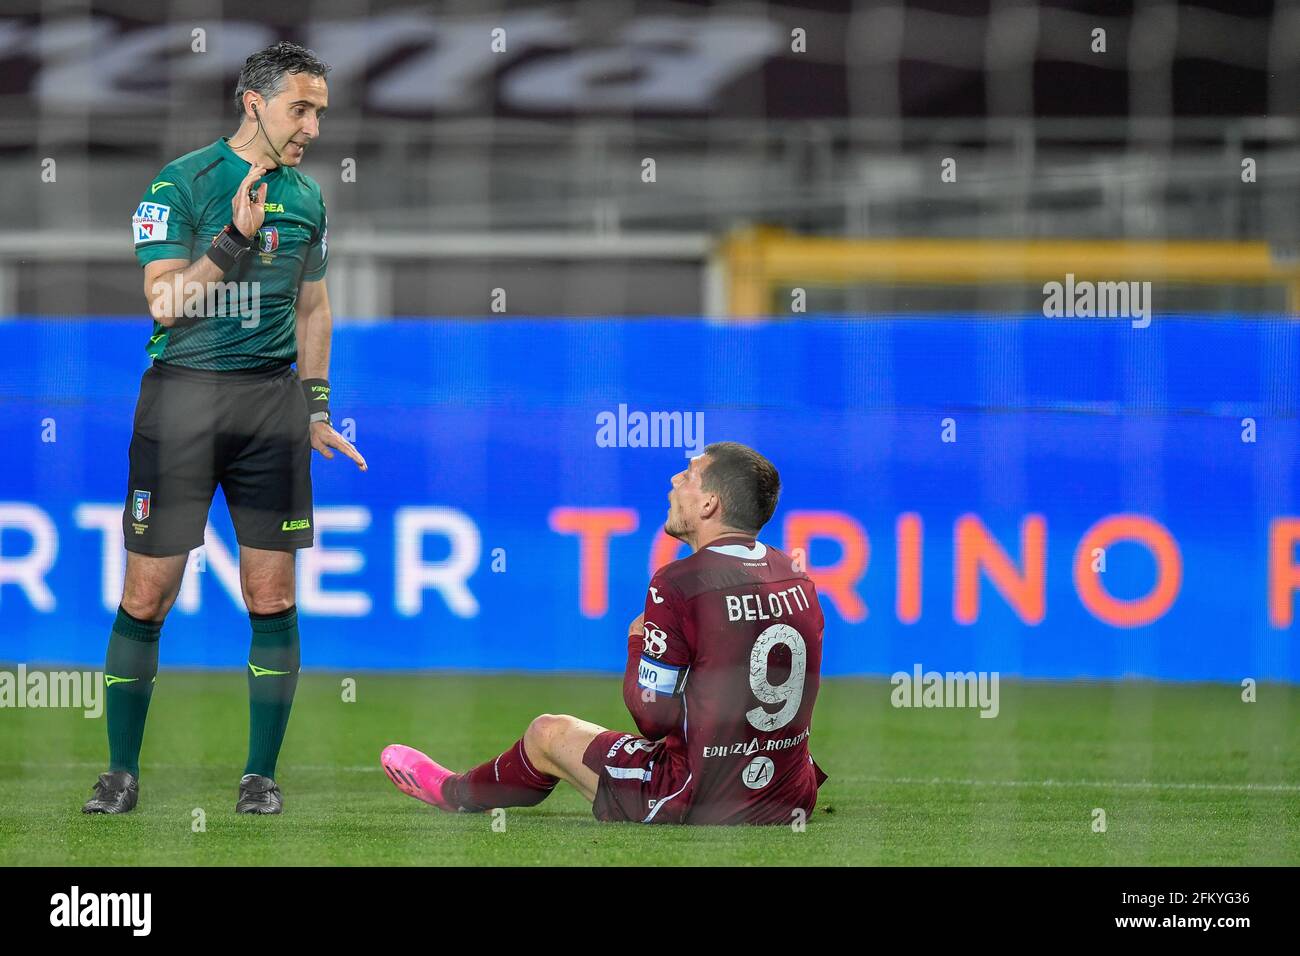 Turin, Italy. 3rd, May 2021. Referee Gianluca Aureliano seen during the Serie A match between Torino FC and Parma Calcio at Stadio Grande Torino in Turin, Italy. (Photo credit: Gonzales Photo - Tommaso Fimiano). Stock Photo